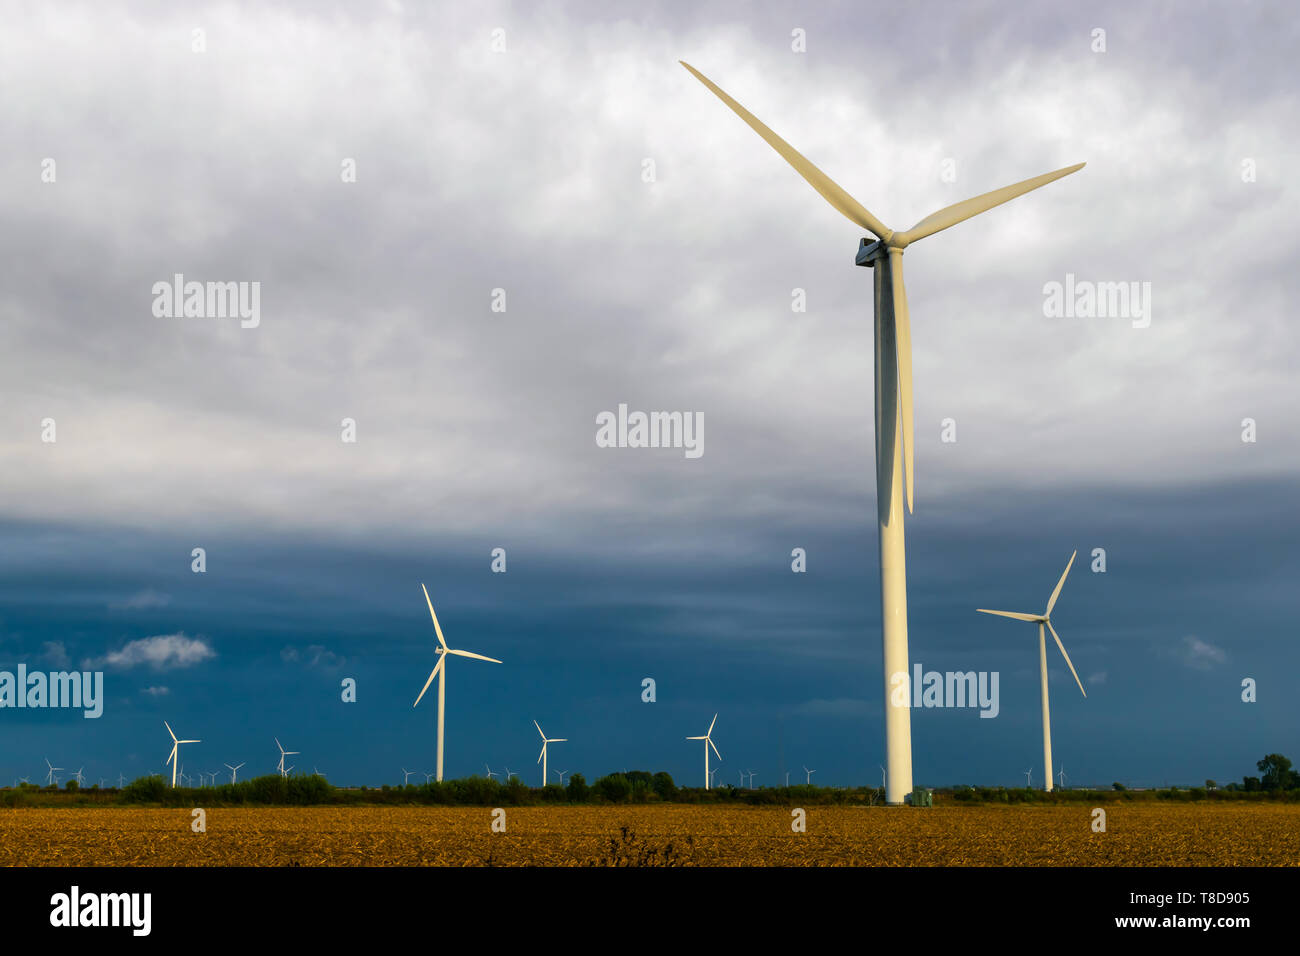 Wind Turbine during a cloudy day on a farm. Stock Photo